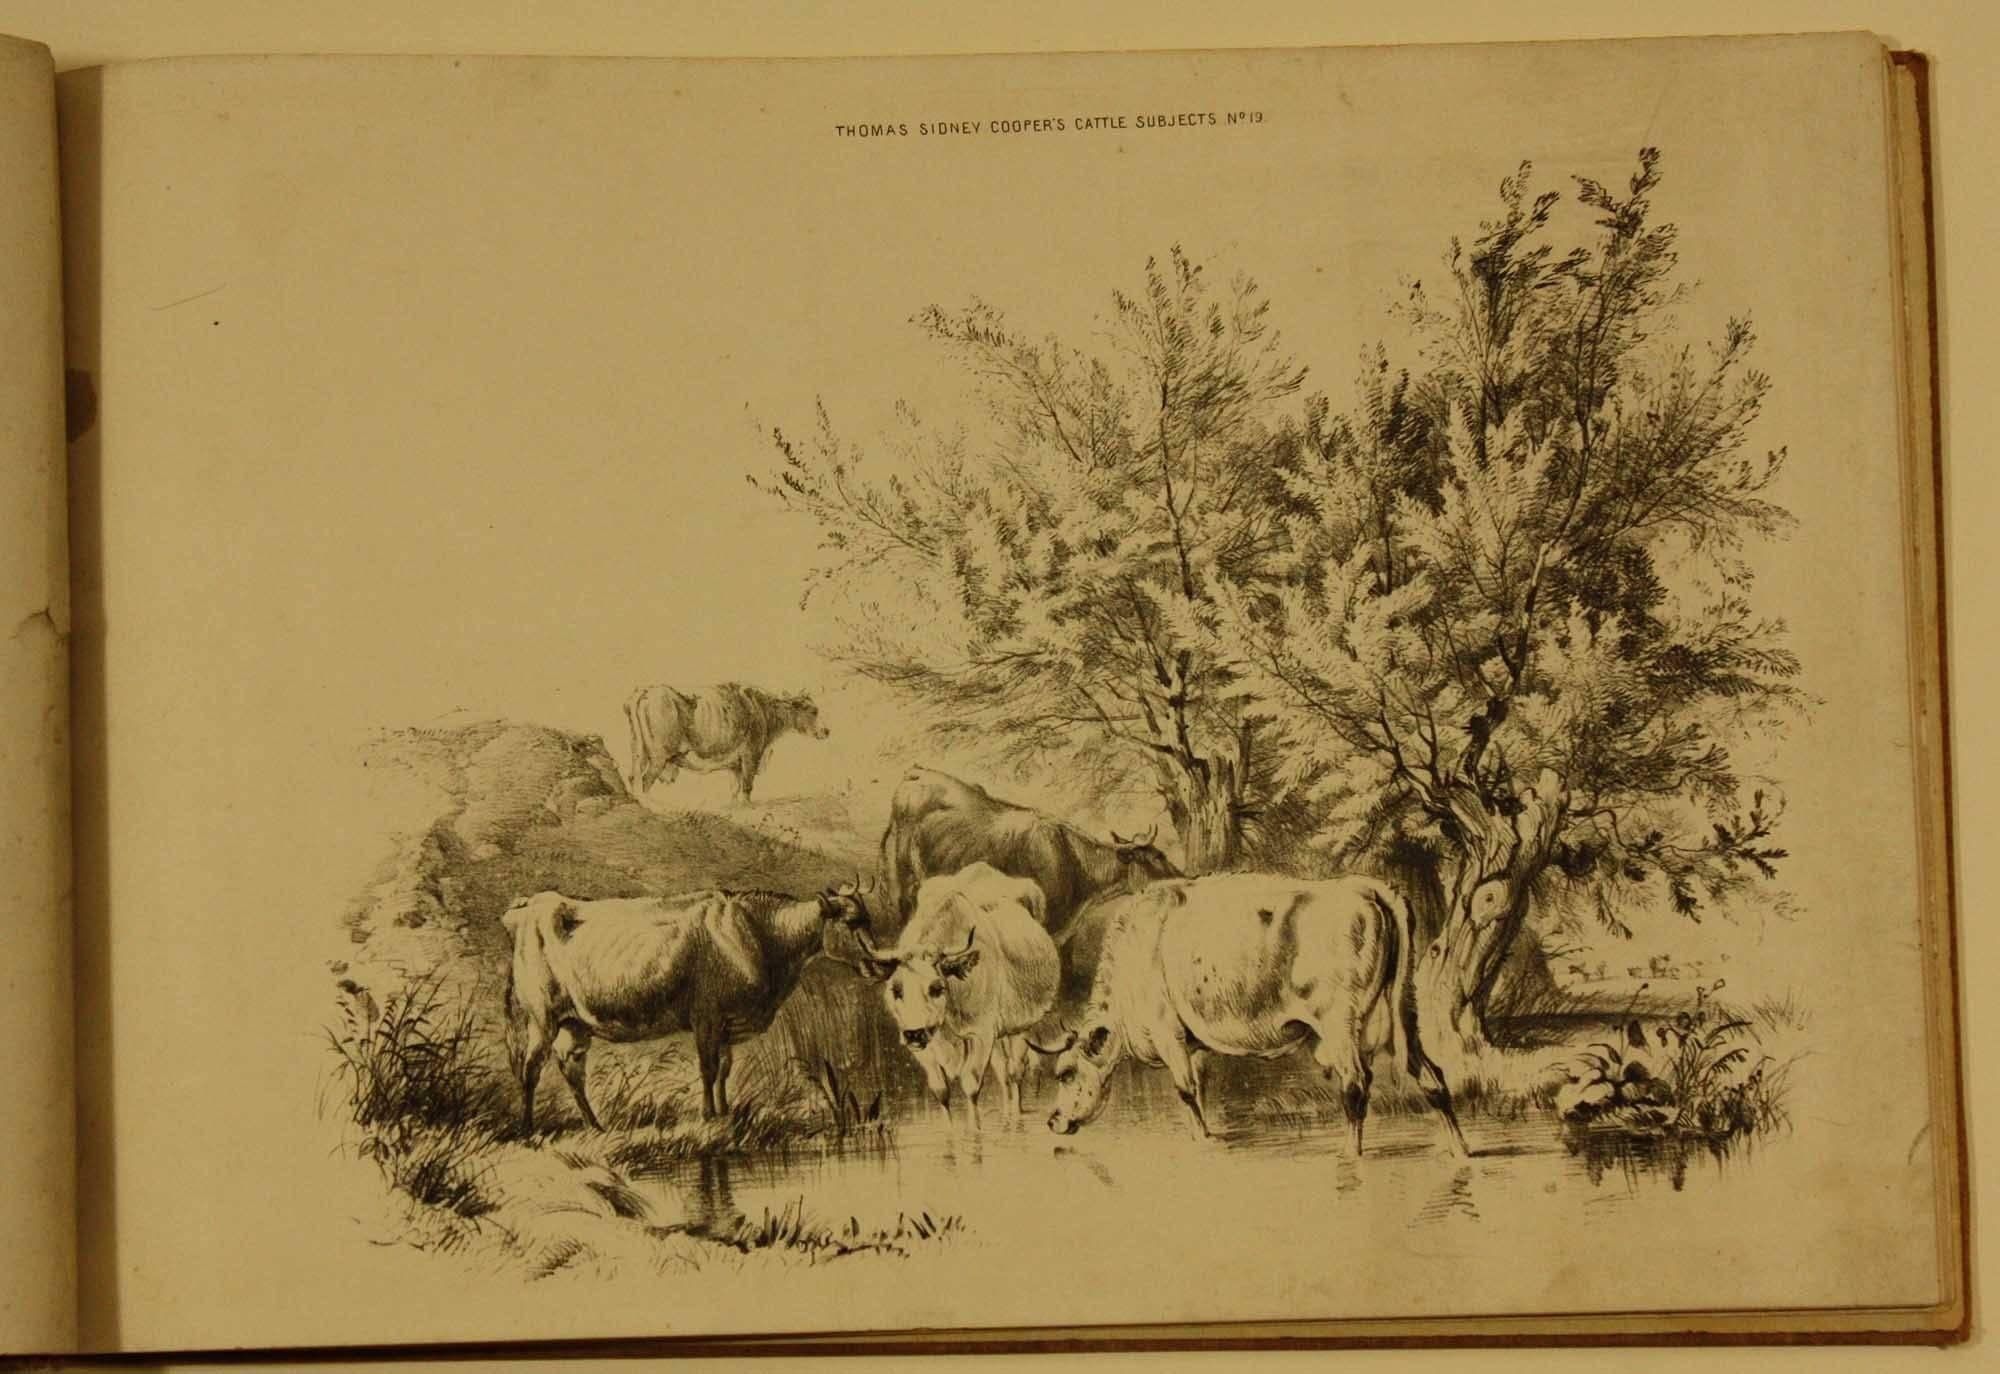 1st Part of Book, Because of the number of pages the only way to list the book is in 3 parts, when you purchase you will get the complete book
COOPER, Thomas Sidney (1803-1902). Groups of Cattle, Drawn from Nature. London: C. Hullmandel for